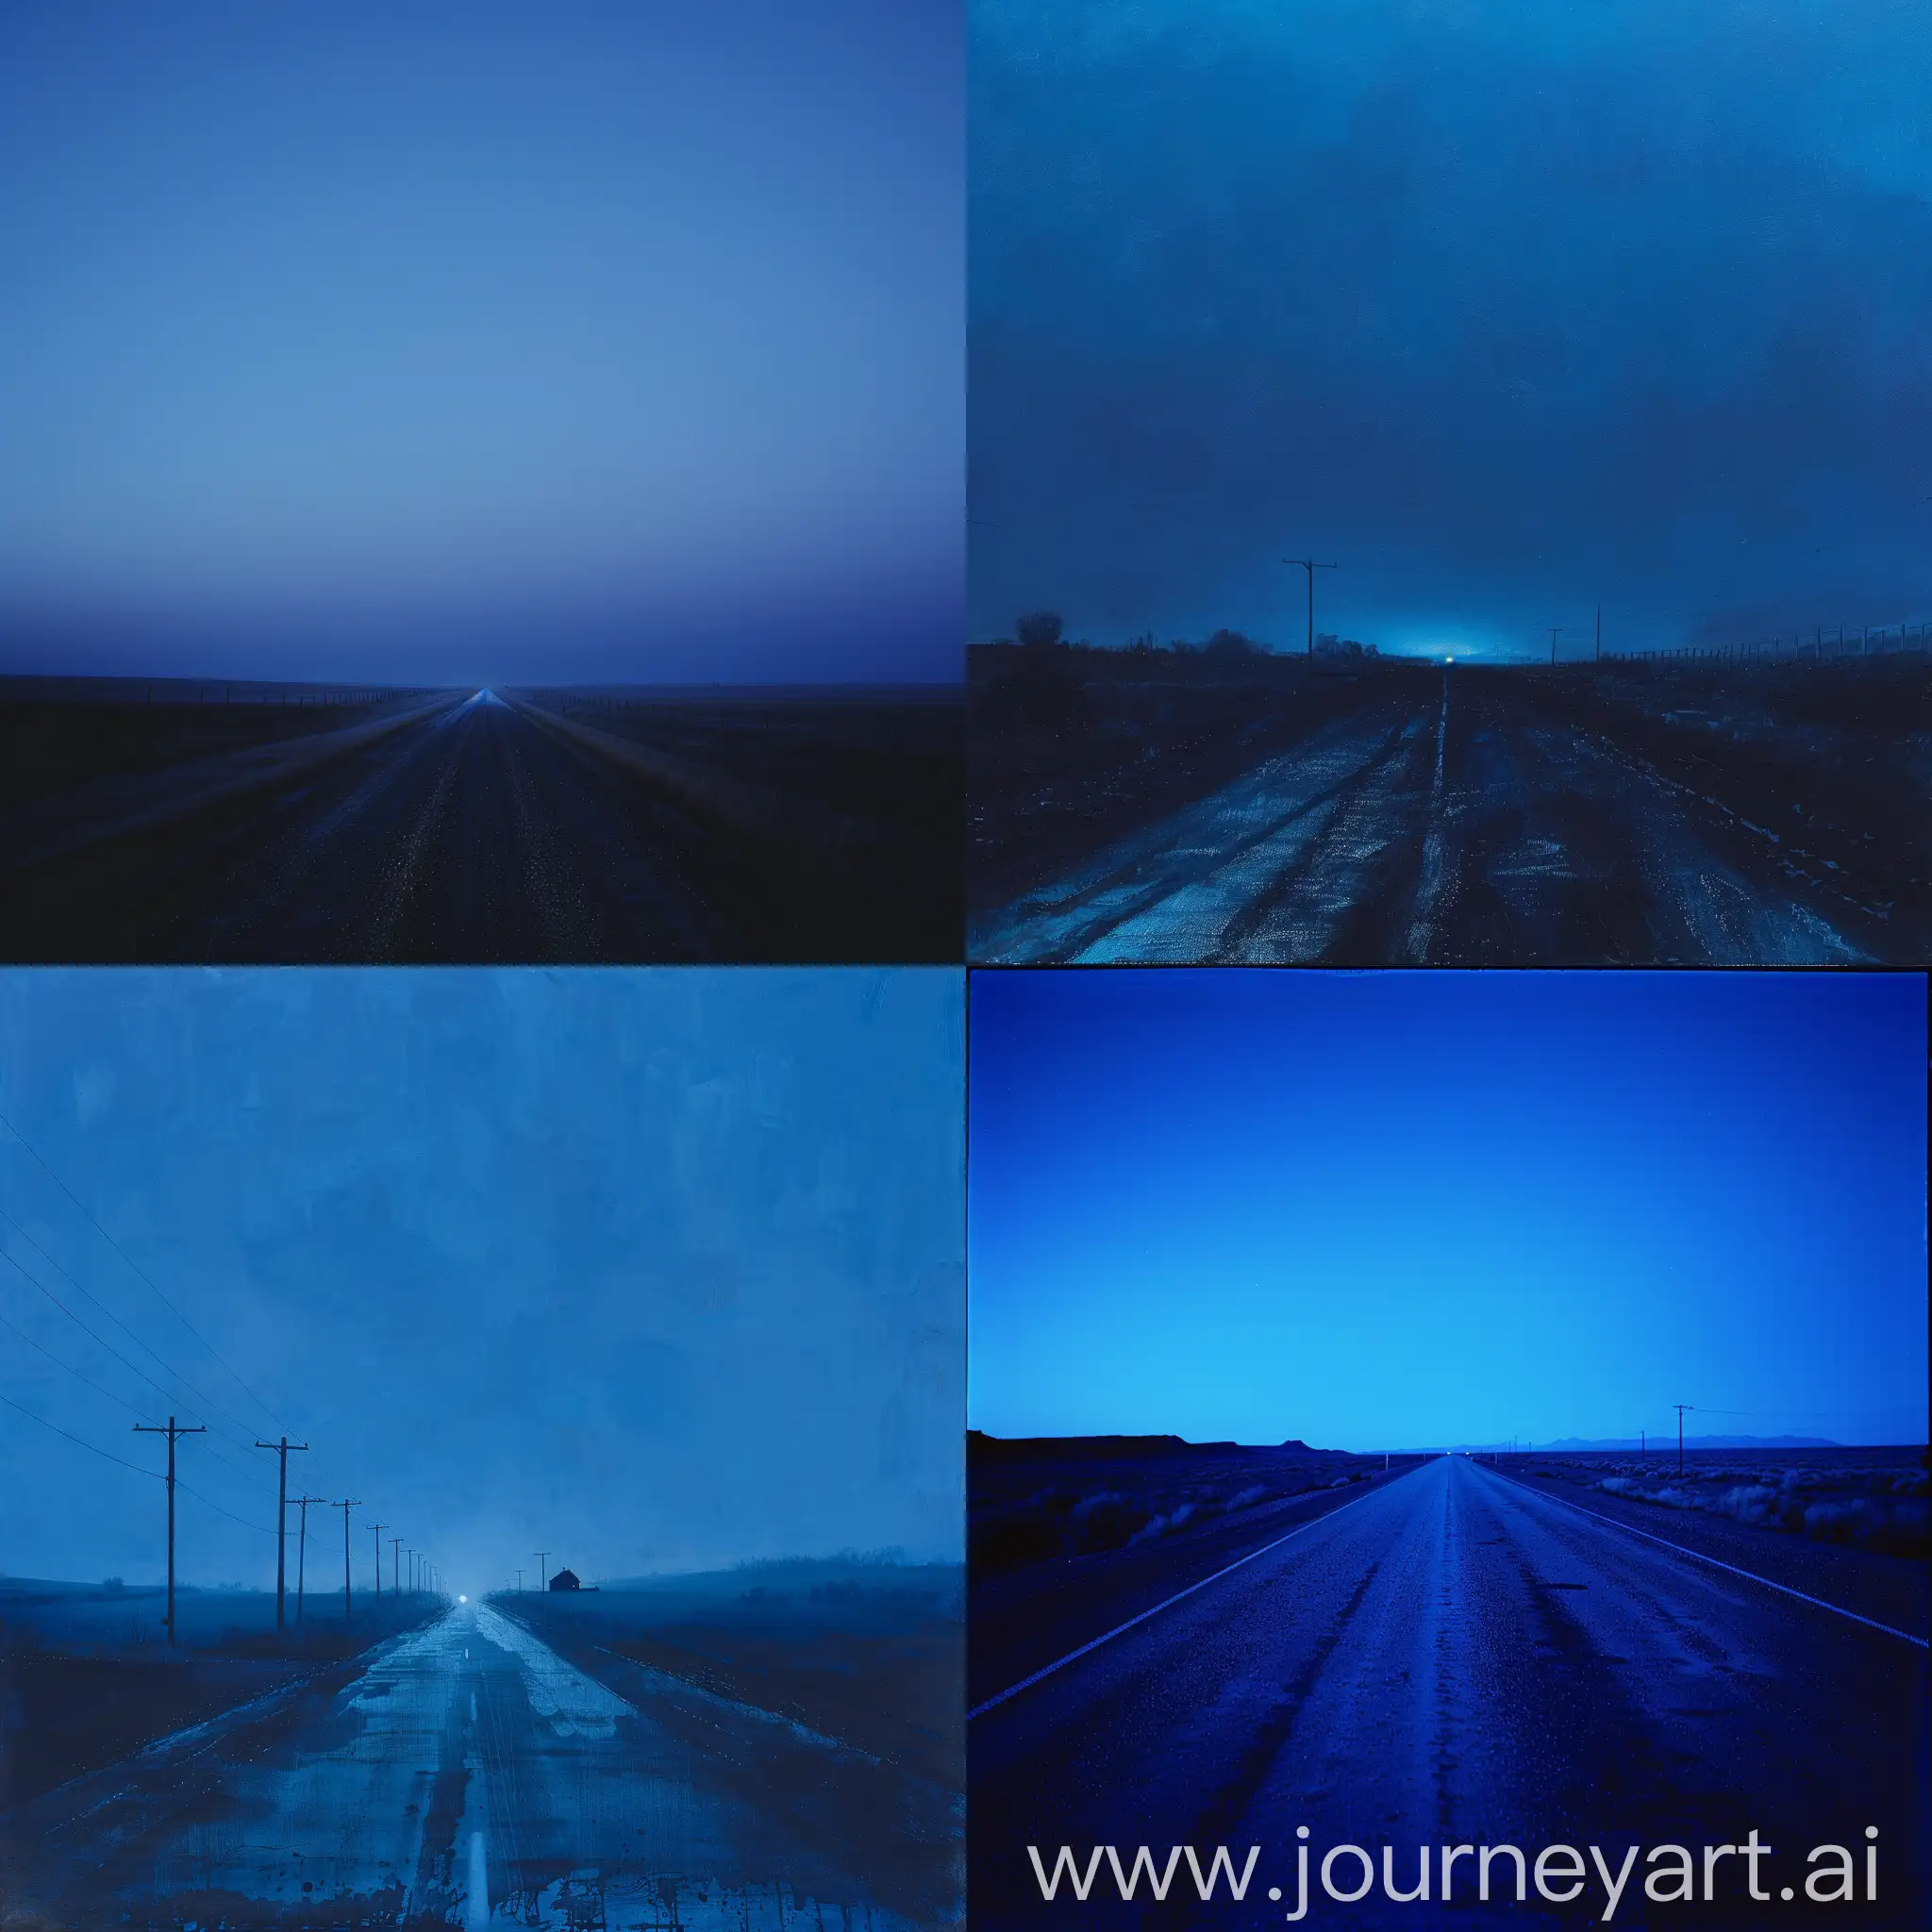 At 4 o'clock in the morning, the weather is starting to light up and it's blue and dark and the environment is soulless, and the road is straight and nobody is there and dreamy.